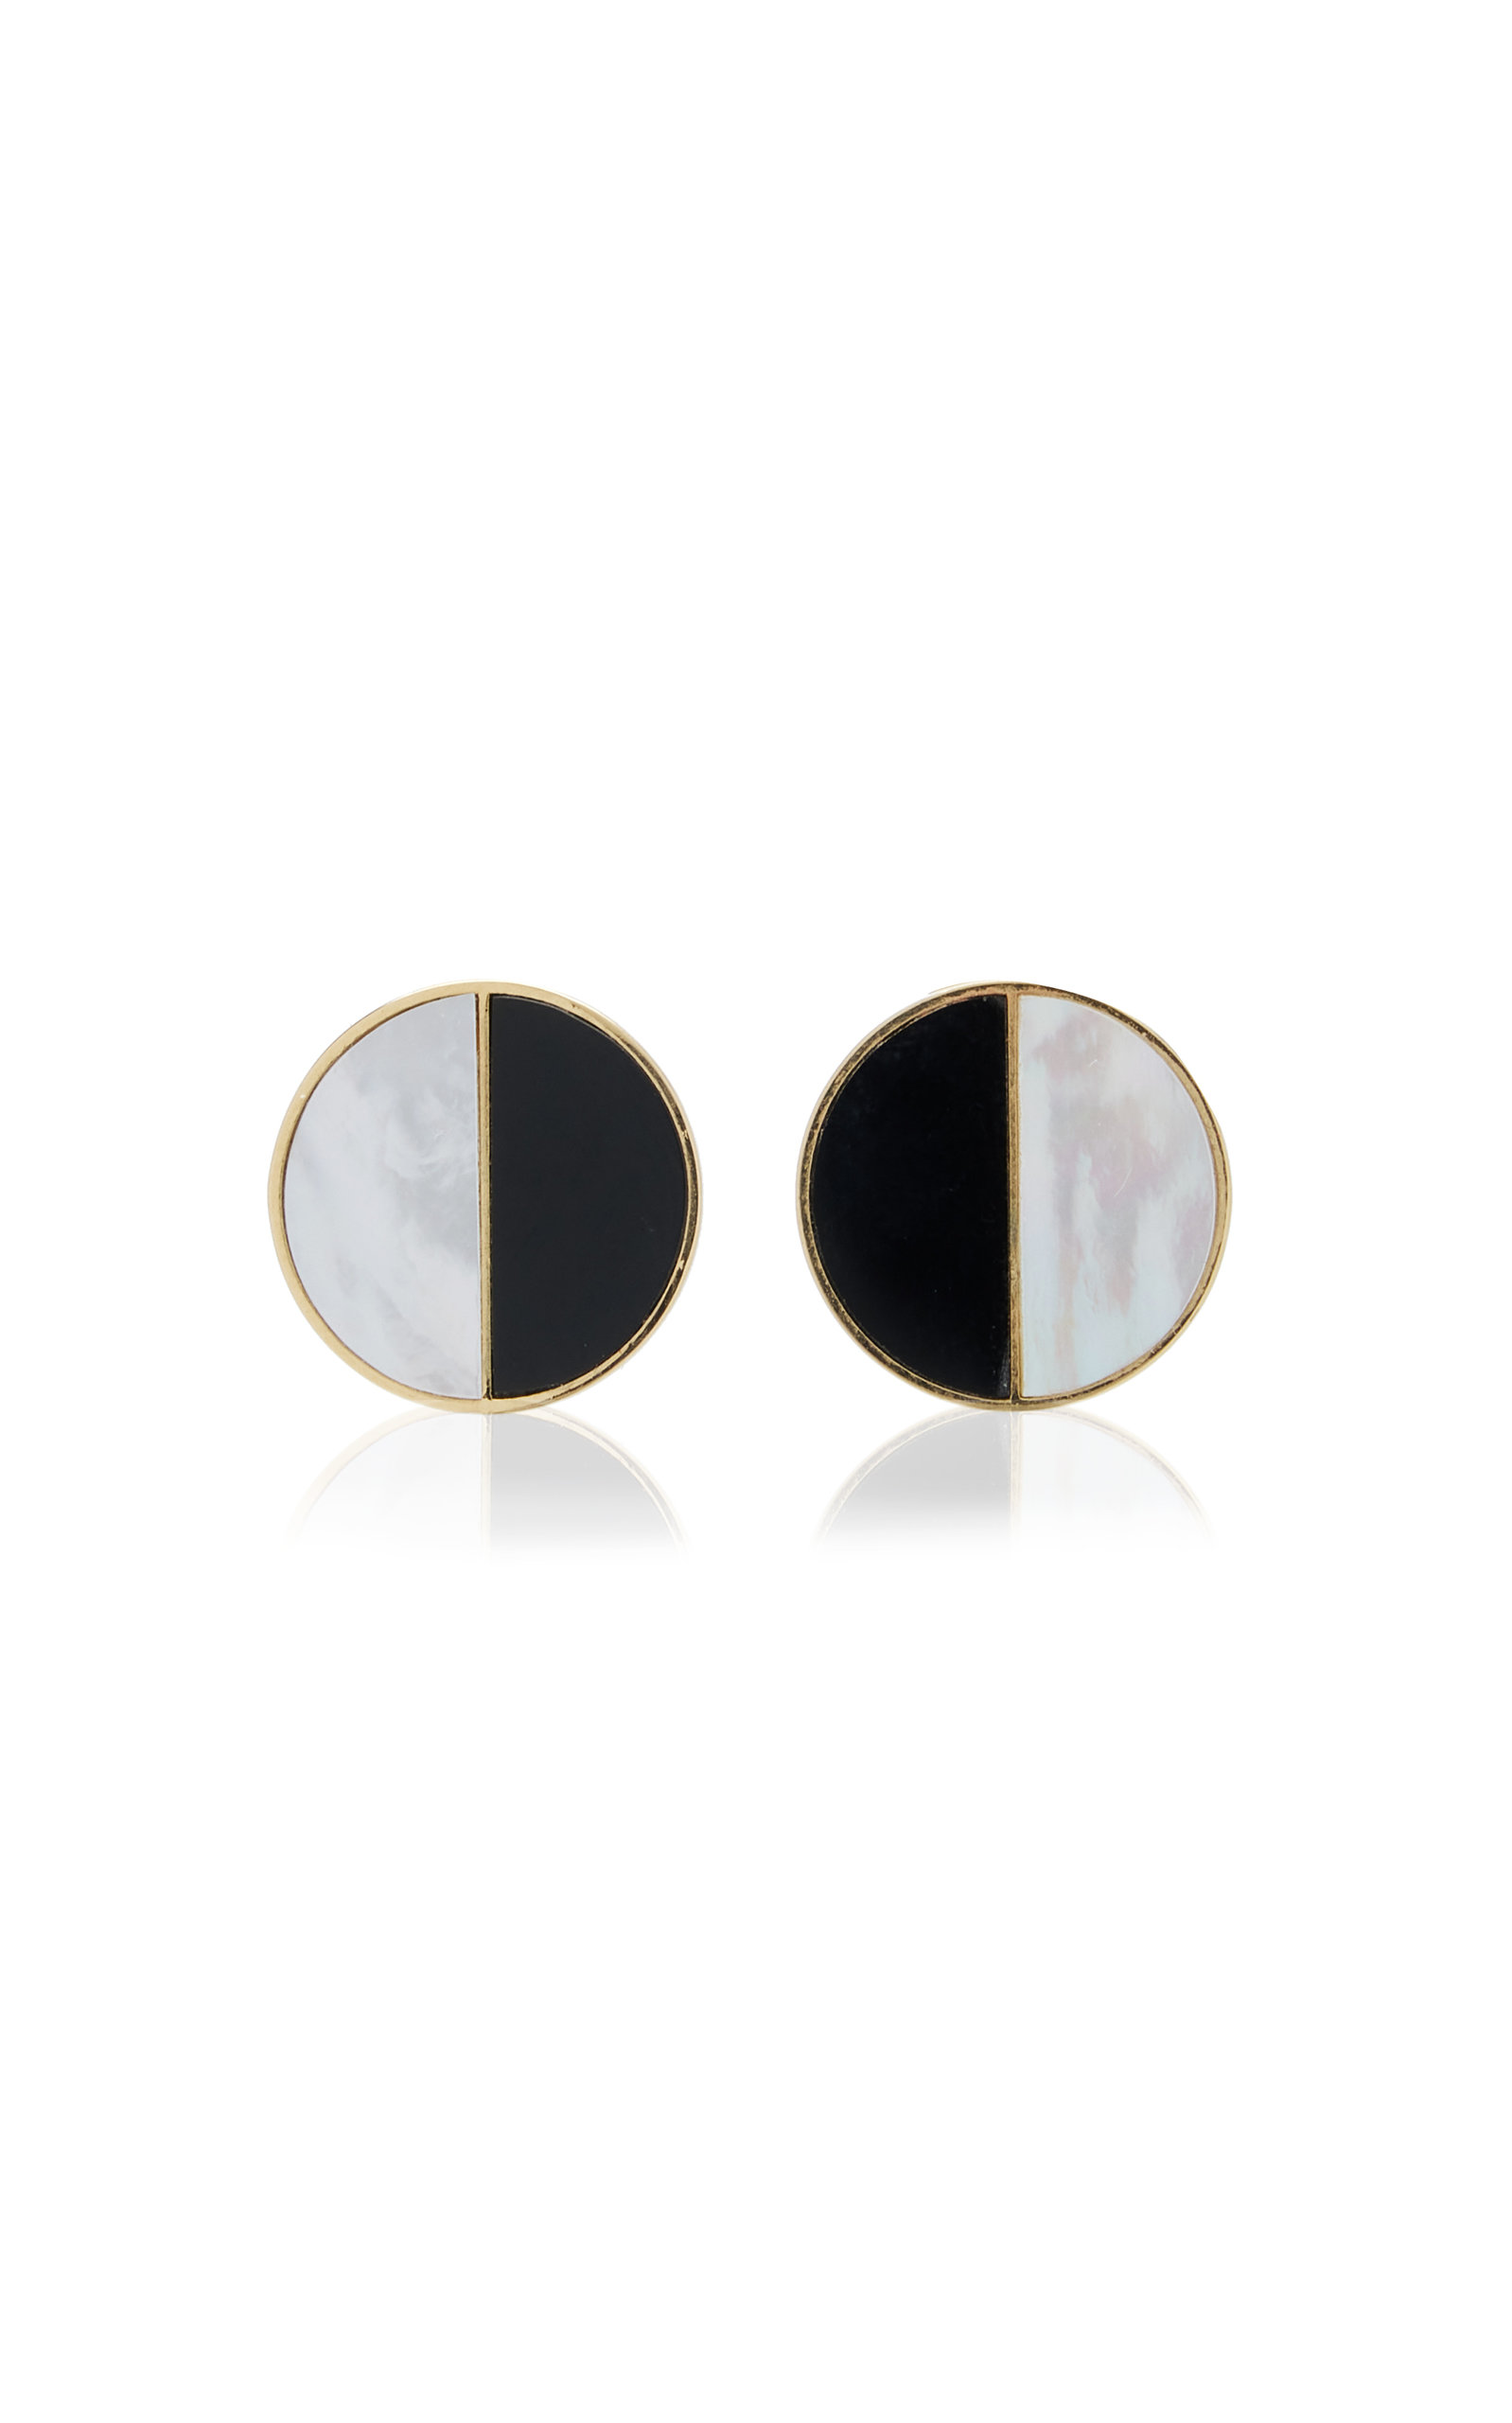 DANIELLE MARKS ECLIPSE 18K YELLOW GOLD ONYX; MOTHER-OF-PEARL EARRINGS